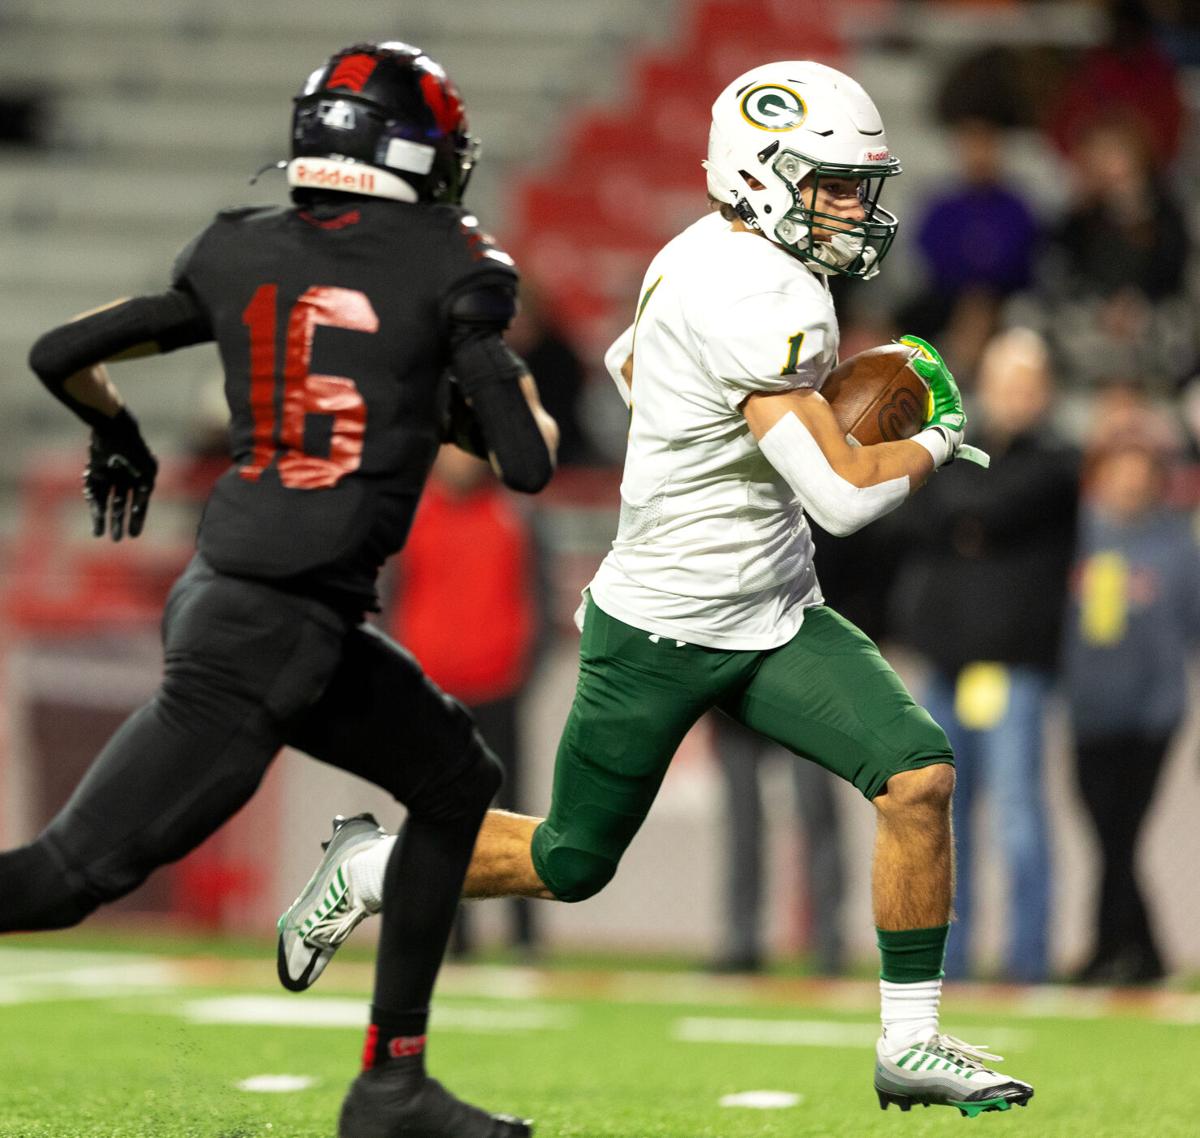 Tristan Alvano kicks field goal in final seconds as Omaha Westside captures  Class A state title